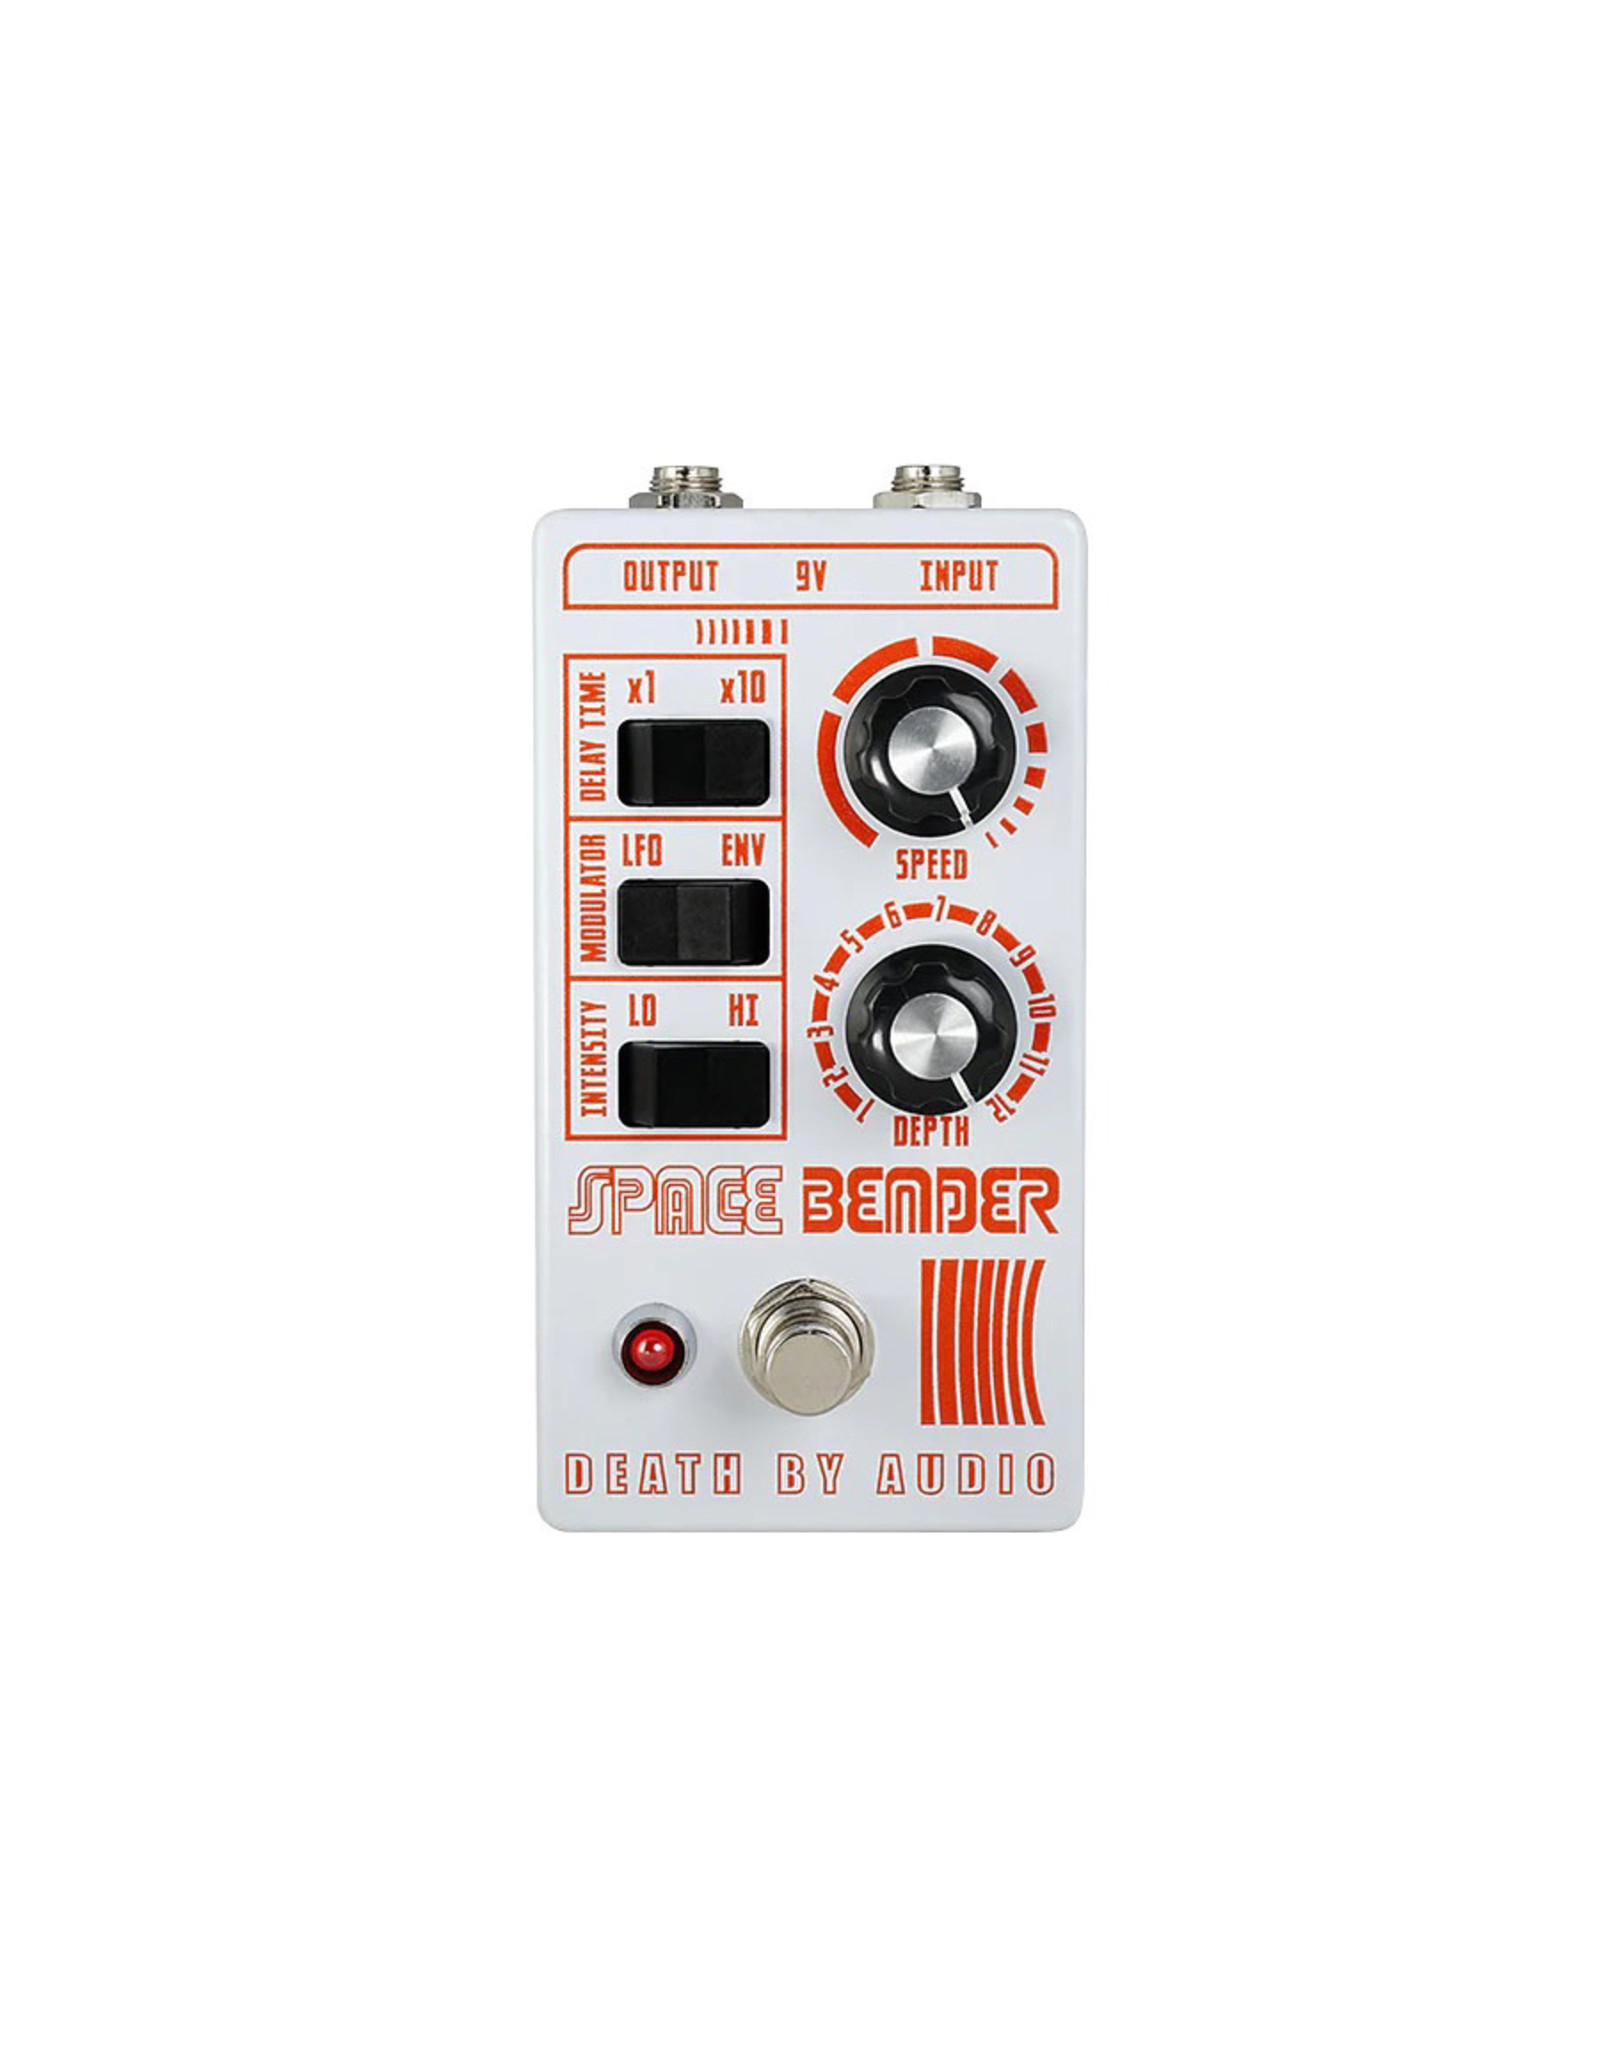 Death By Audio Death By Audio Space Bender Limited Edition Colorway